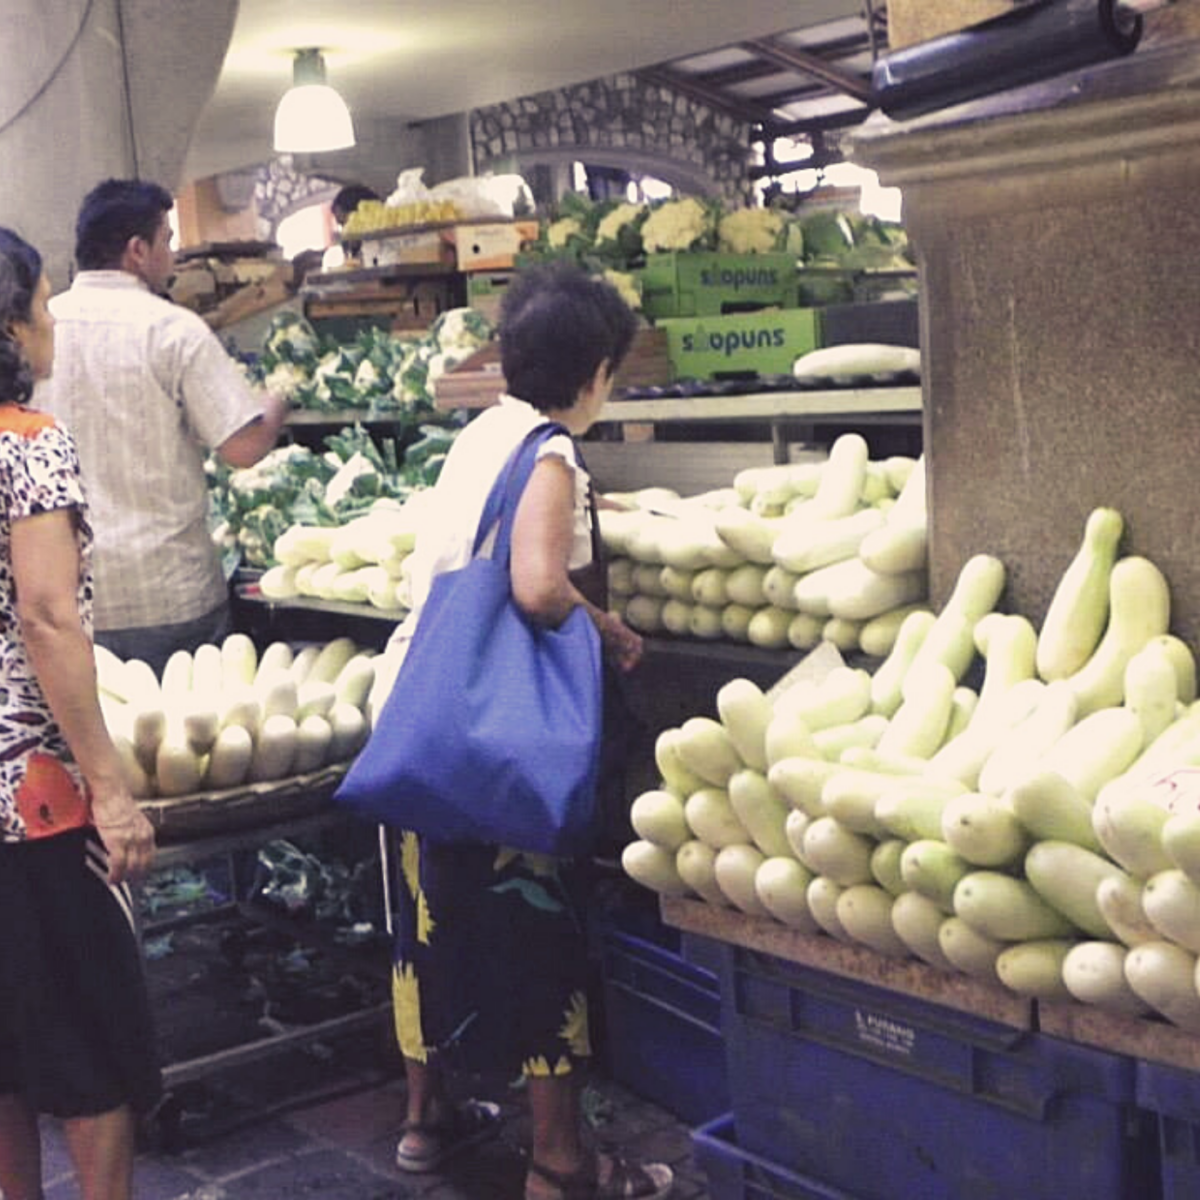 Bazaar Port Louis - White Cucumber Display with two women and one man in front.